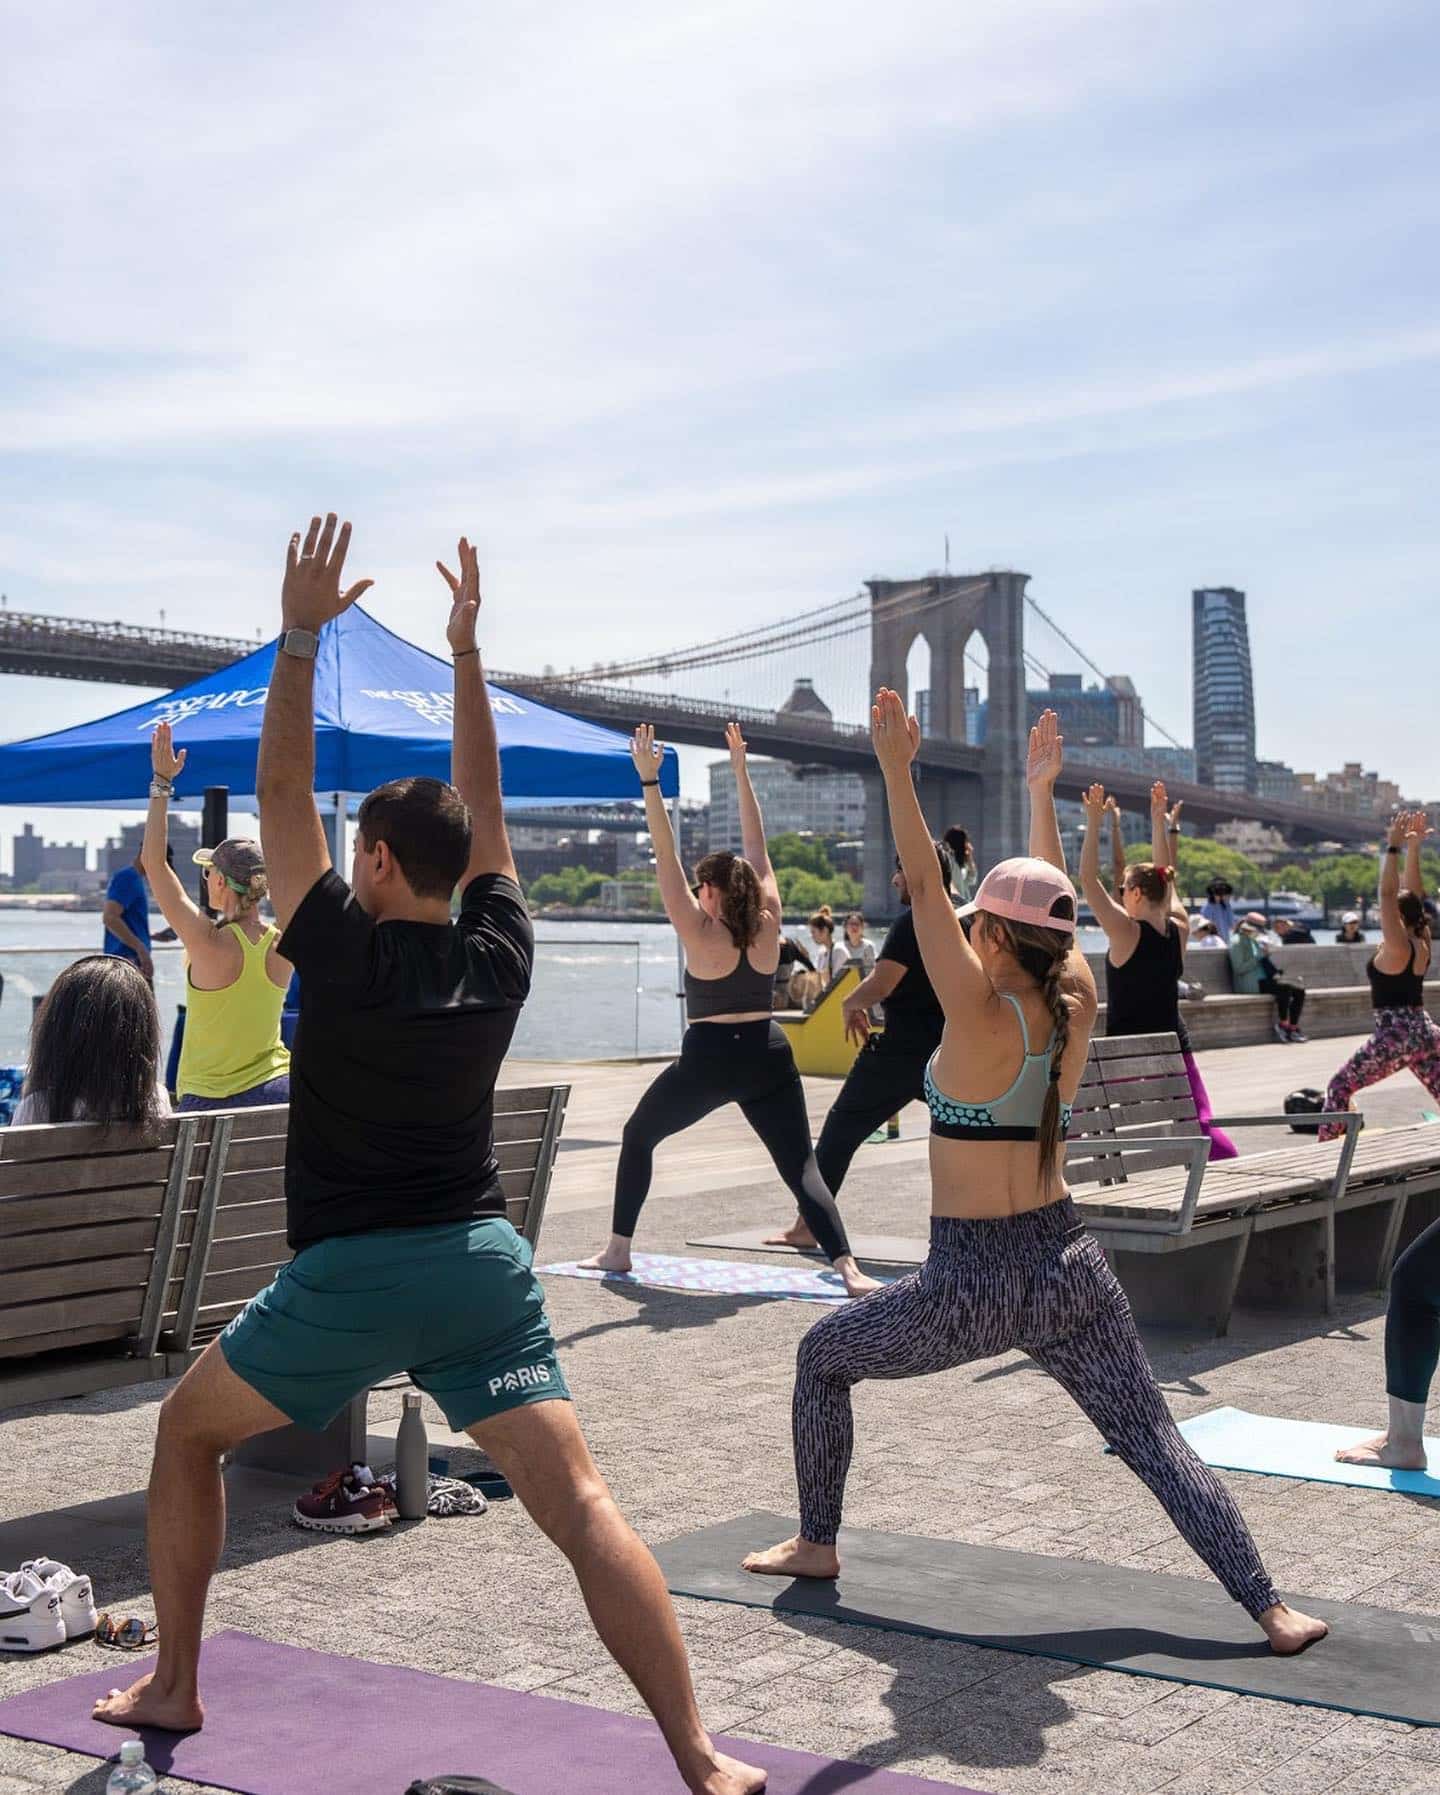 Happy 🧘 Find your inner peace every Saturday morning ➤ style with @lyonsdenpy. 

July RSVPs are now open.
 Saturdays @ 10:30am
 Heineken Riverdeck
Presented by @nyphospital
Walk ups welcome